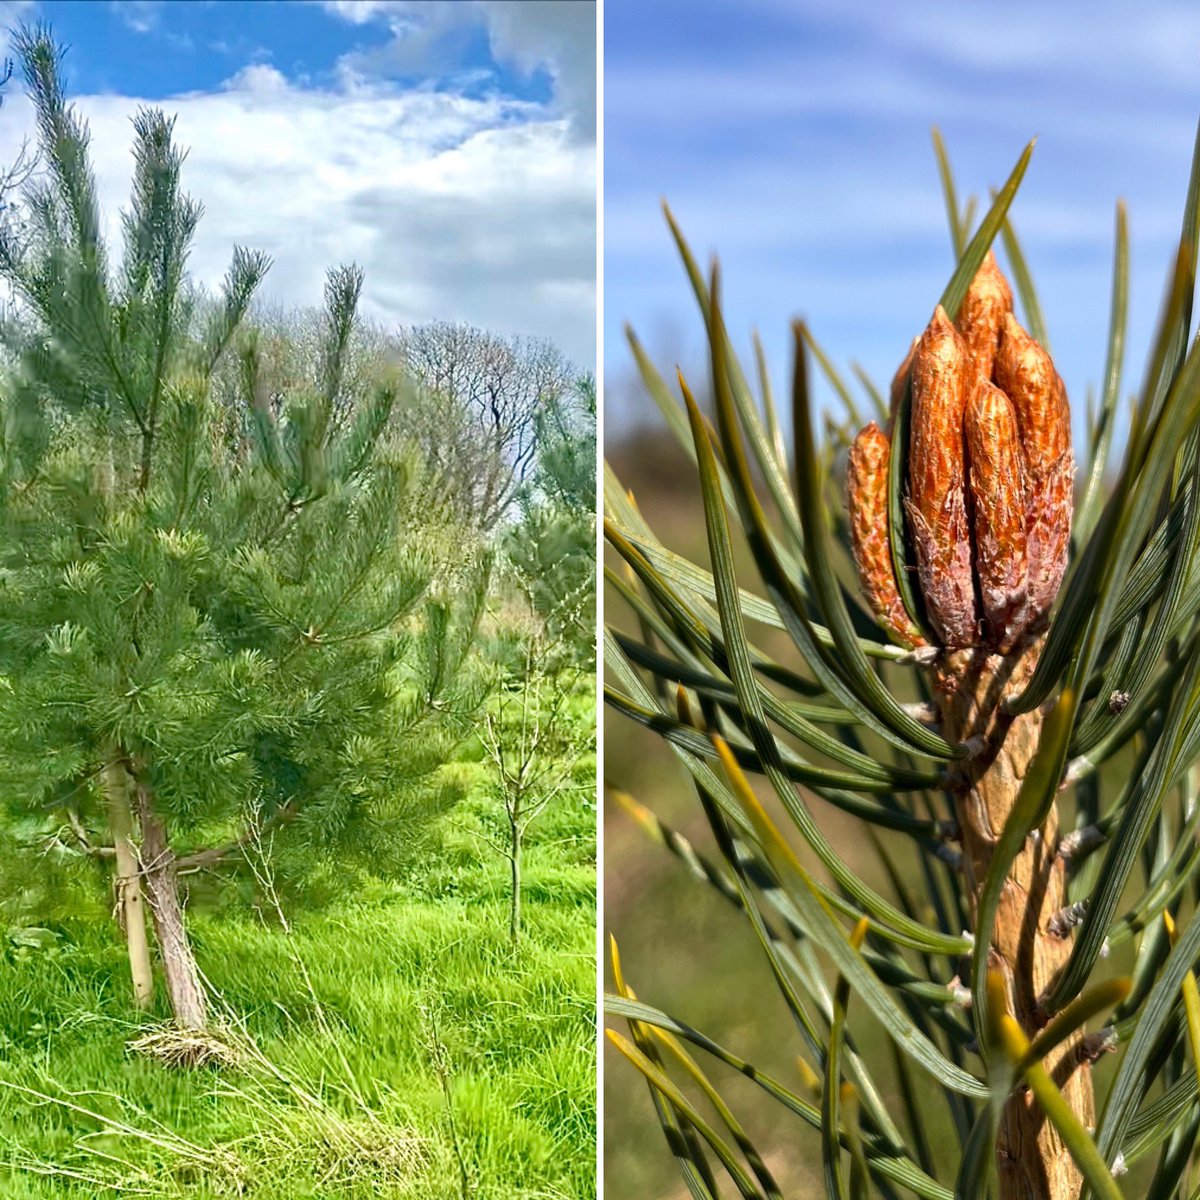 On the left are Scots pines we planted as bare-roots 3yrs ago. On right is a growing tip. This stunning native coniferous tree is fast growing and hardy. In Brehon law they were classed as the ‘Lords of the Woods’. We’ve planted 900🤩 of them on Wildacres! #trees #nativewoodland